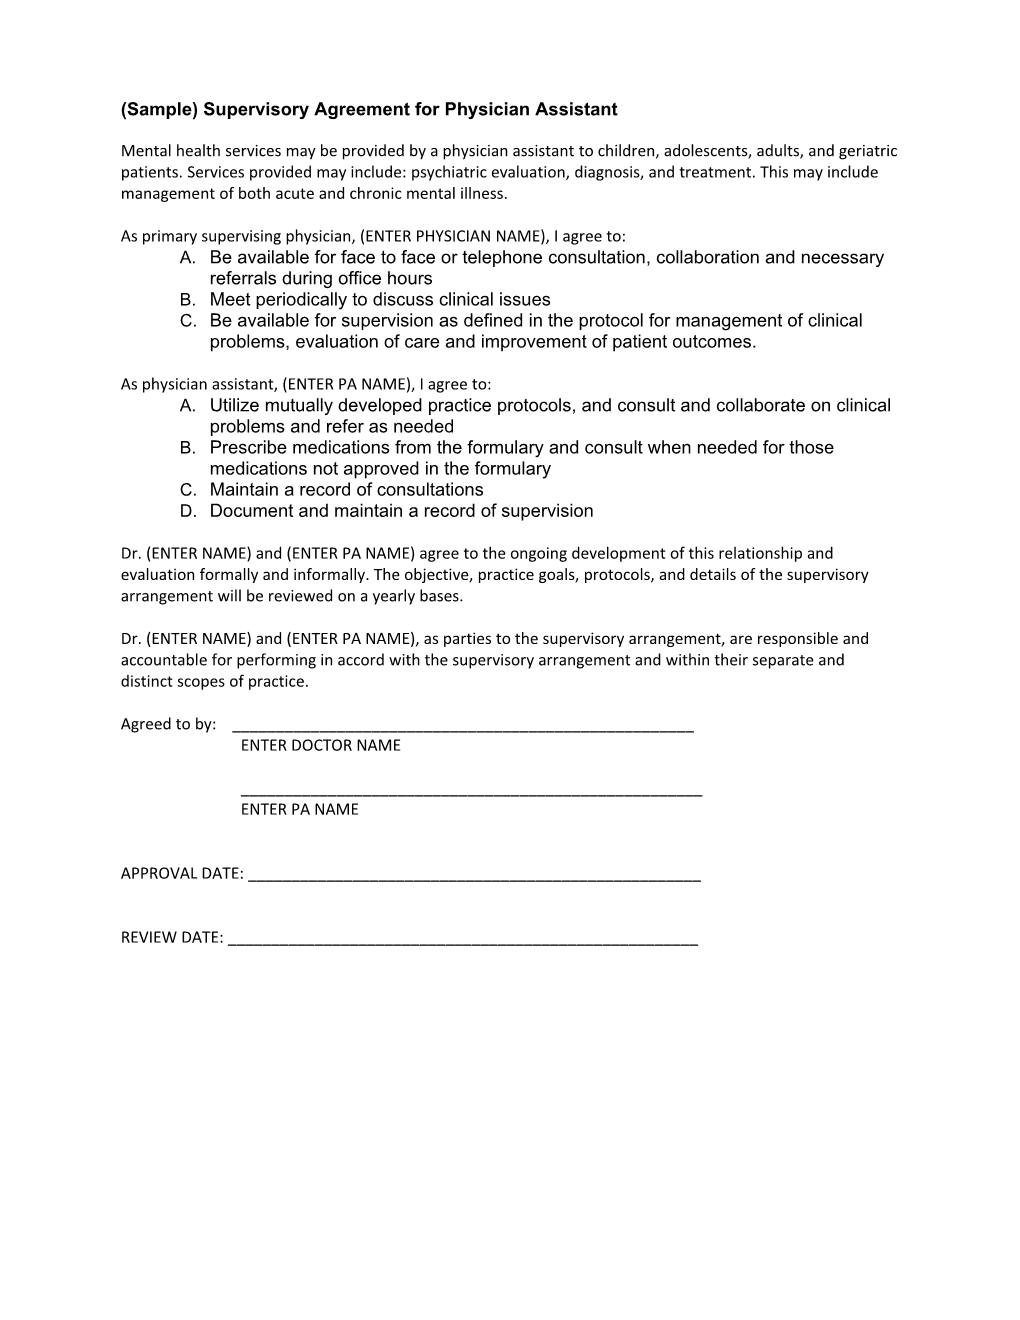 (Sample) Supervisory Agreement for Physician Assistant